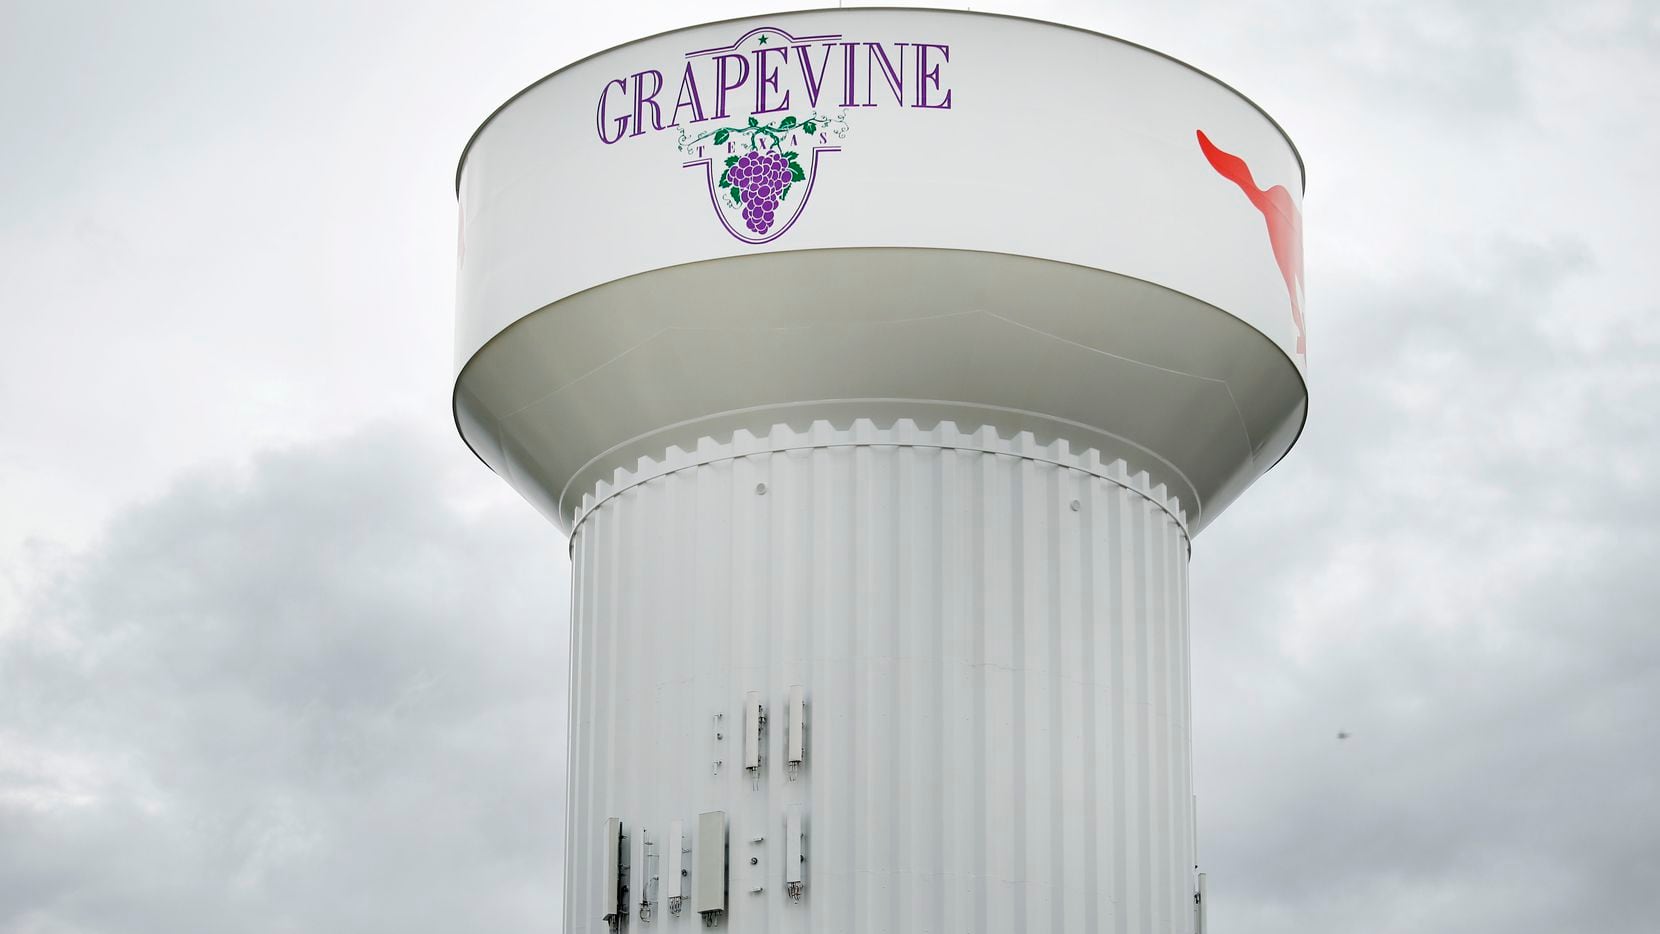 A Grapevine, Texas, water tower is pictured Tuesday, June 23, 2020.